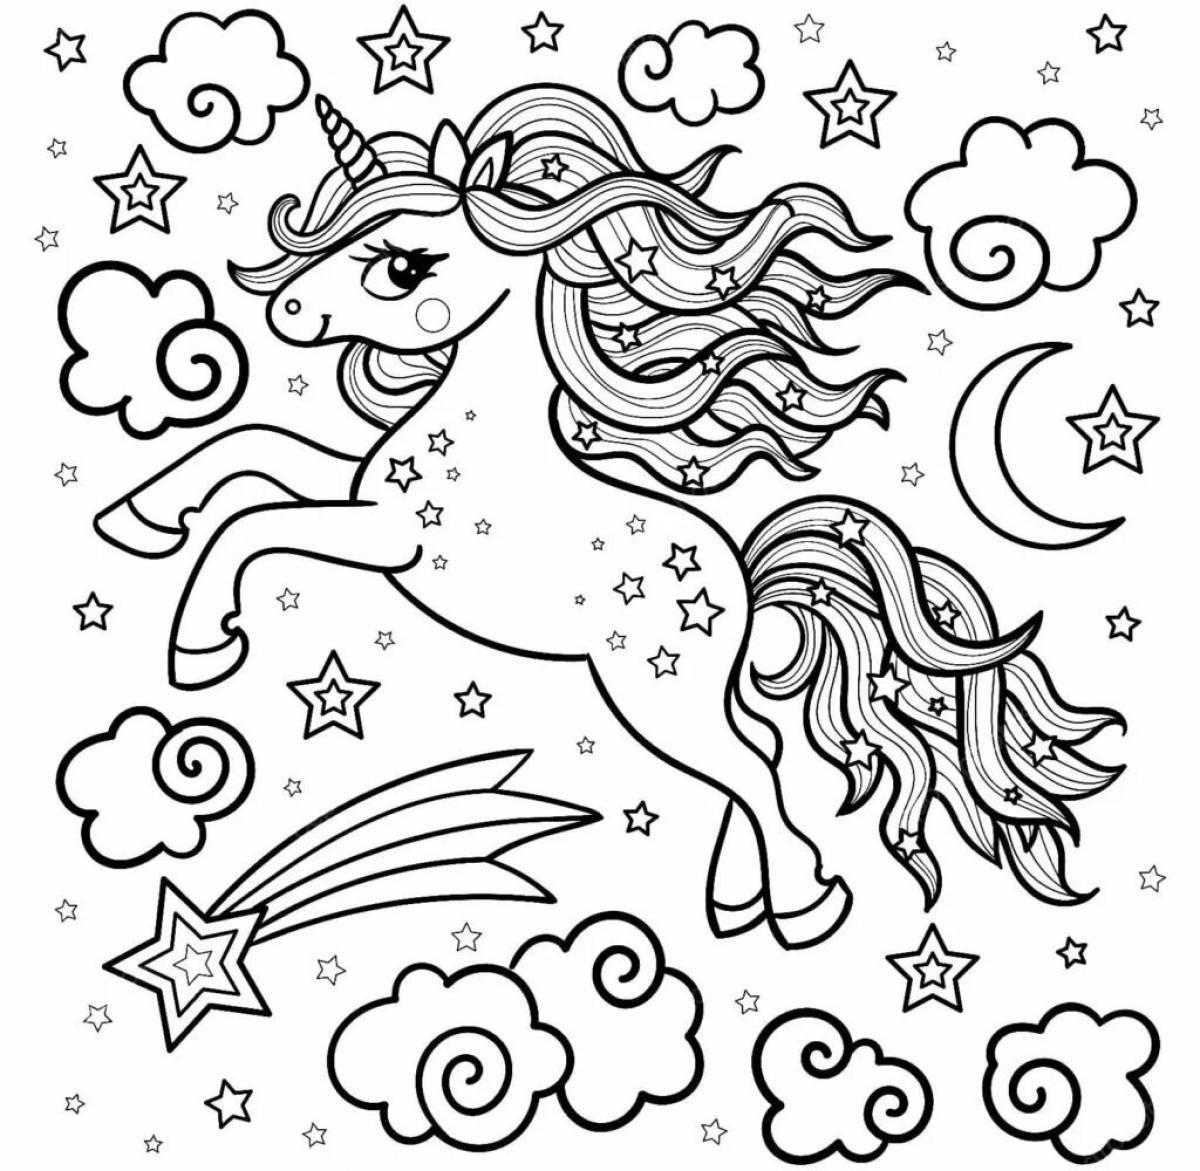 Live coloring for children 5-6 years old for girls unicorns